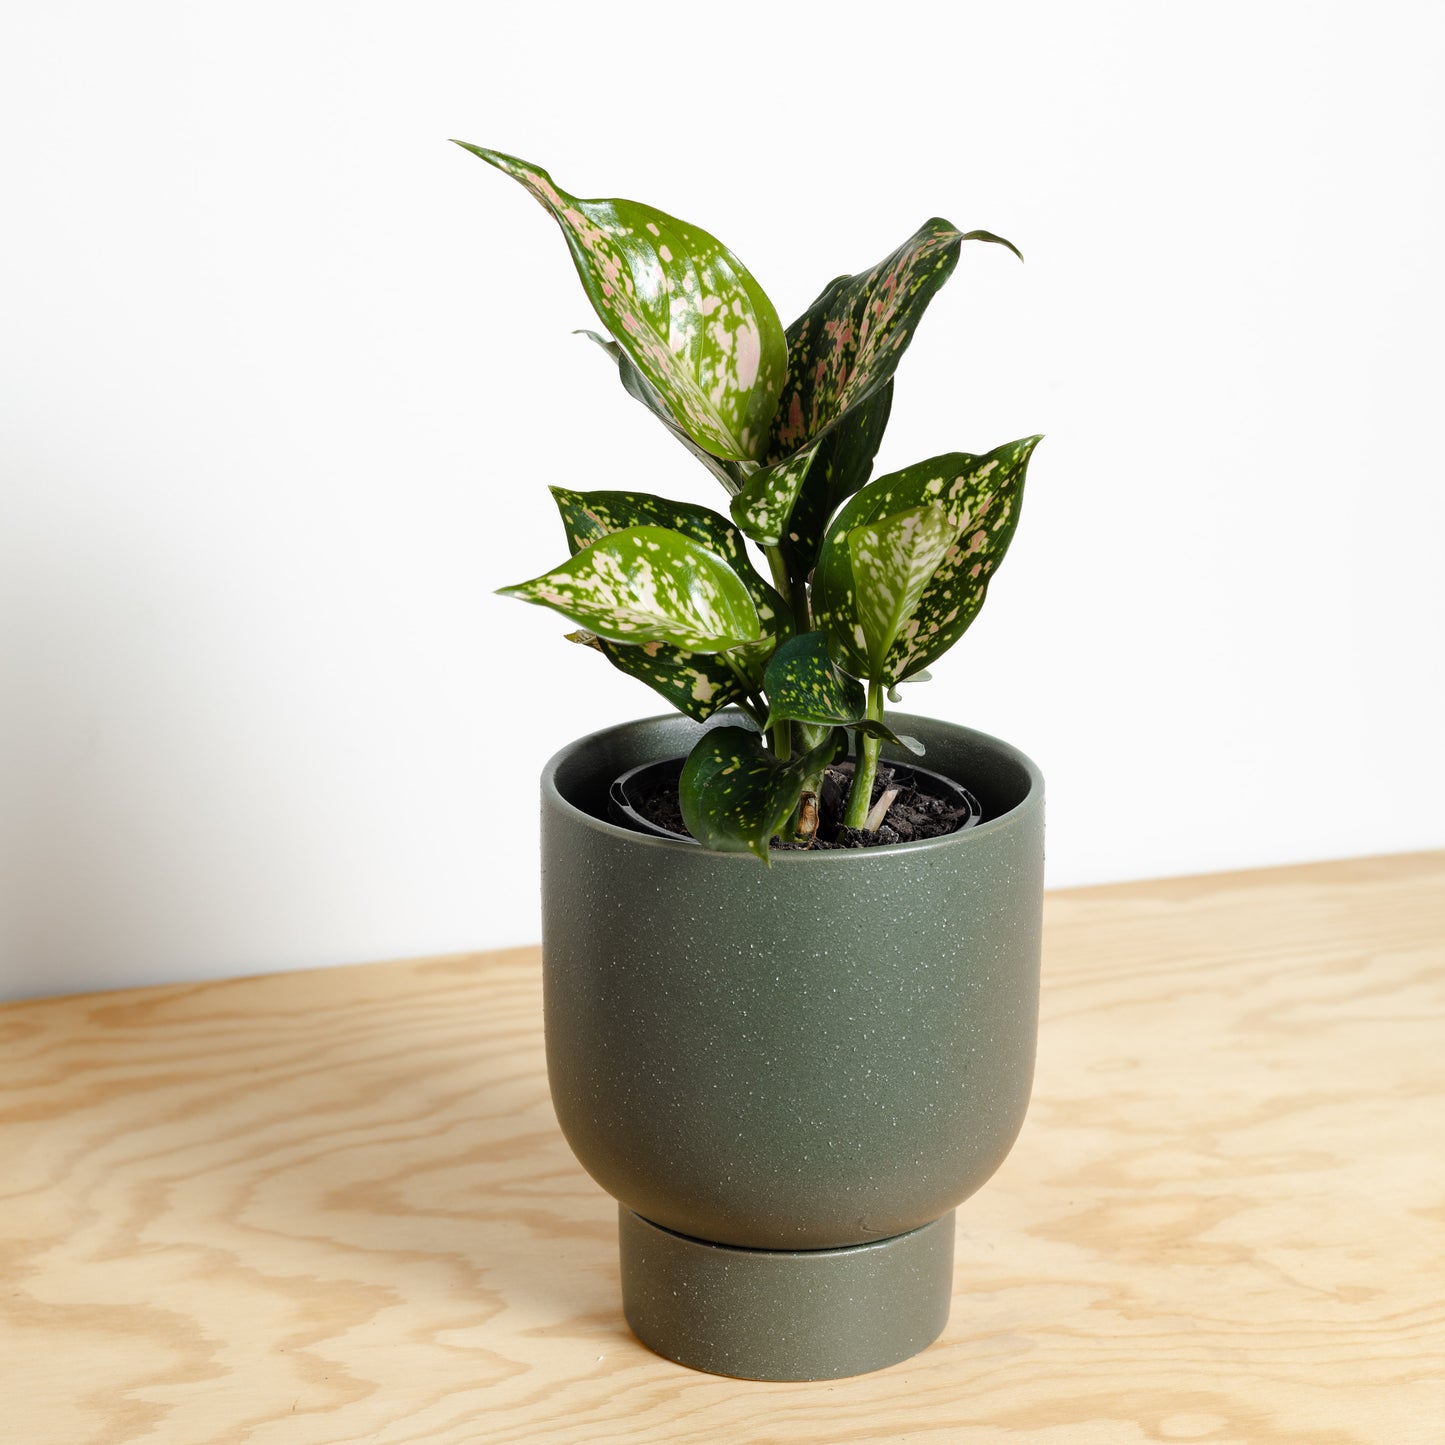 Aglaonema Wishes in Cypress Green Finch Pot by Evergreen Collective